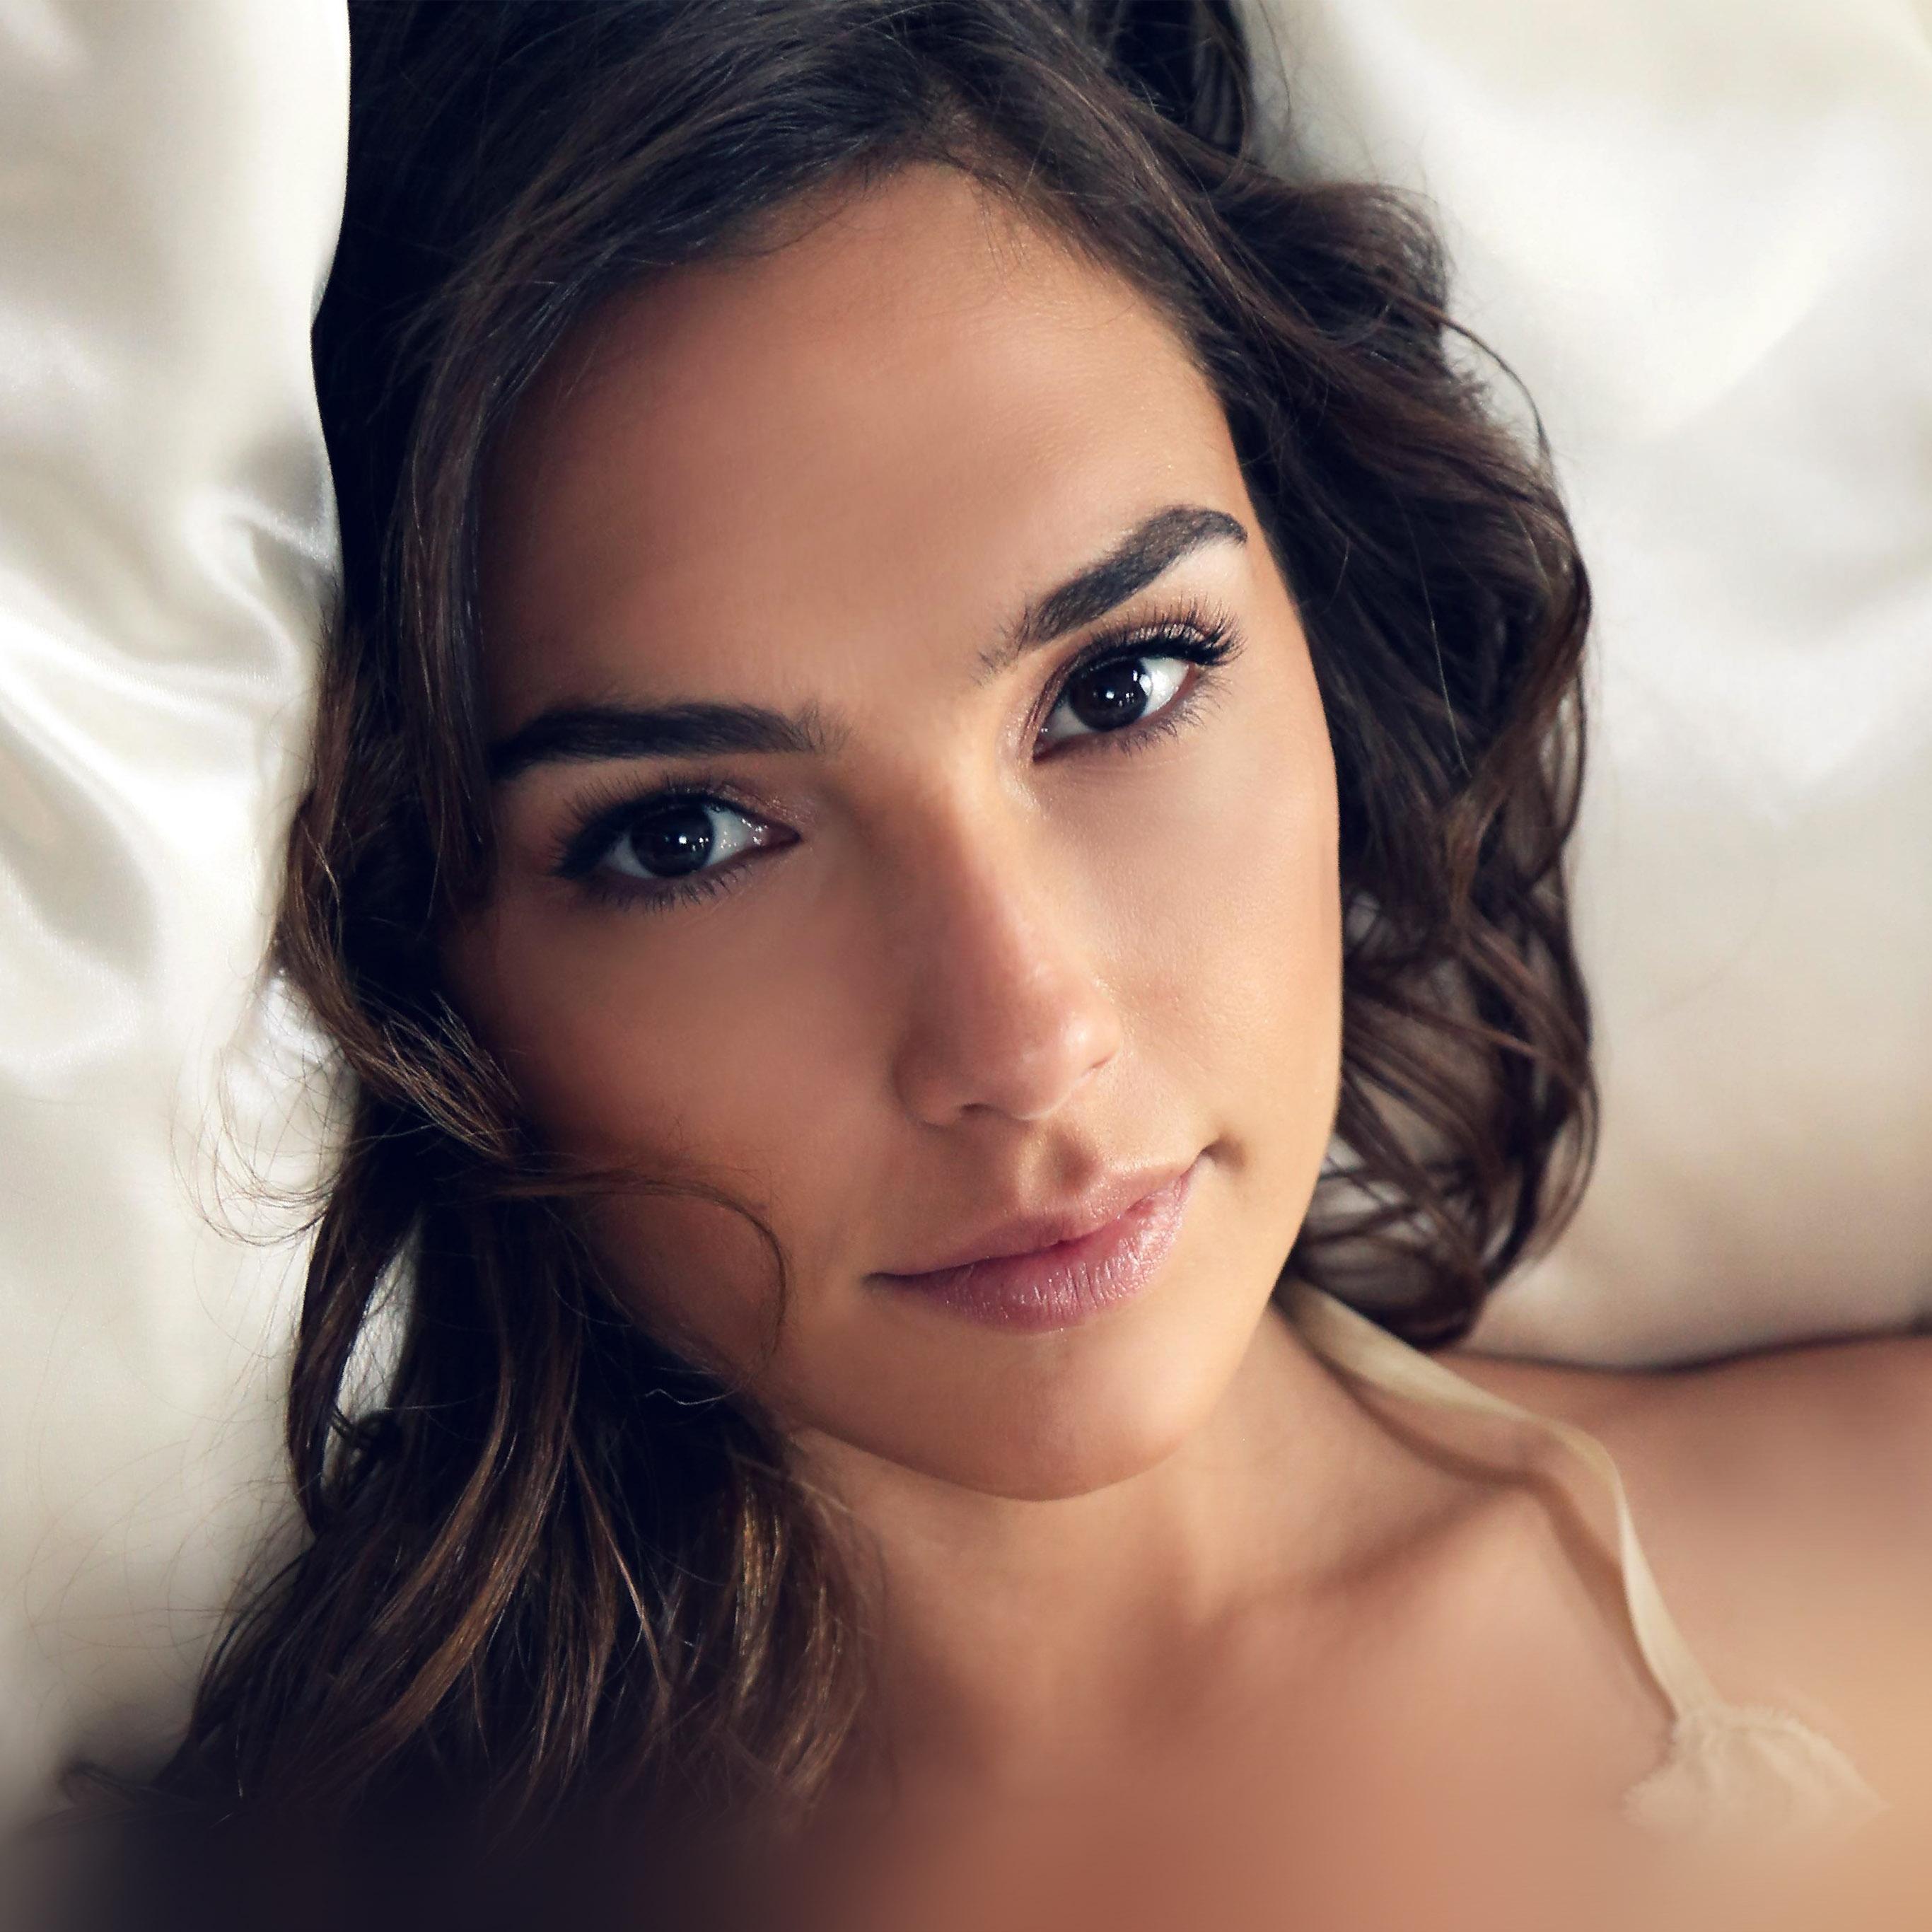 Androidpapers.co. Android wallpaper. gal gadot beauty